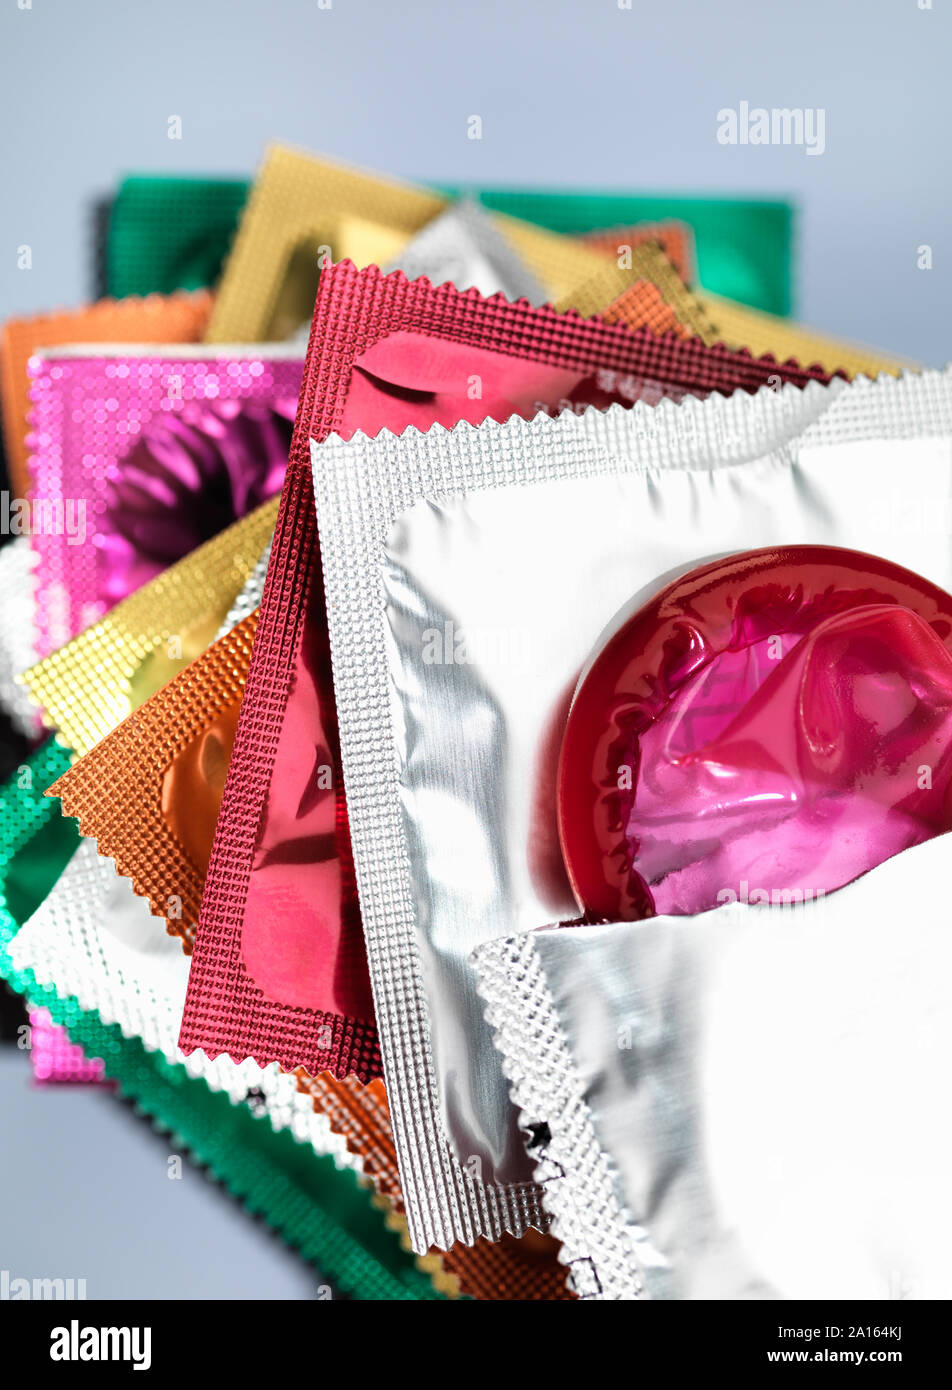 Contraceptives, Condoms in packets Stock Photo